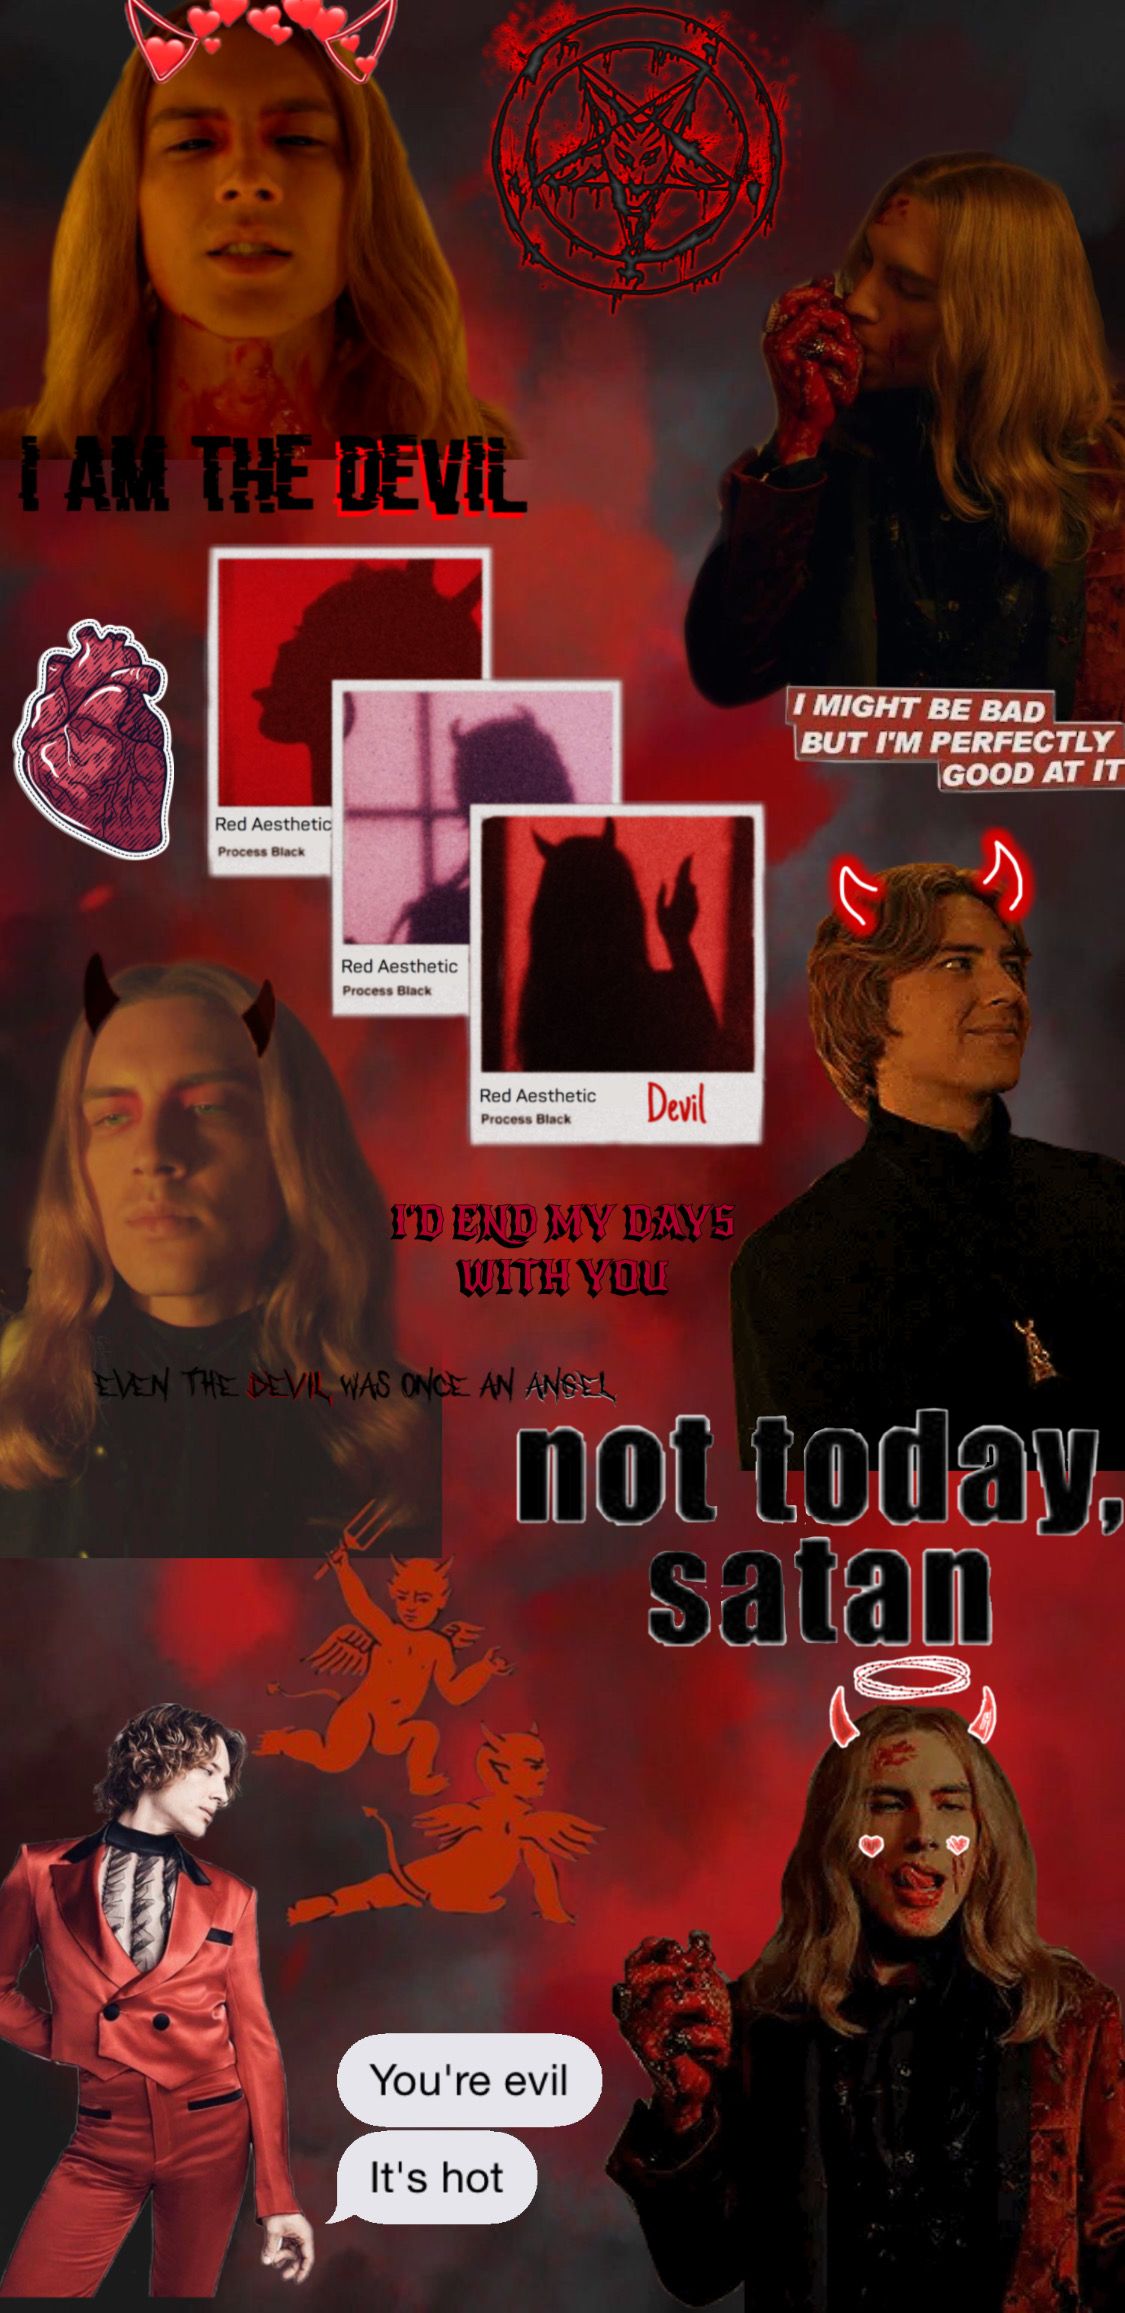 ahsapocalypse Image by